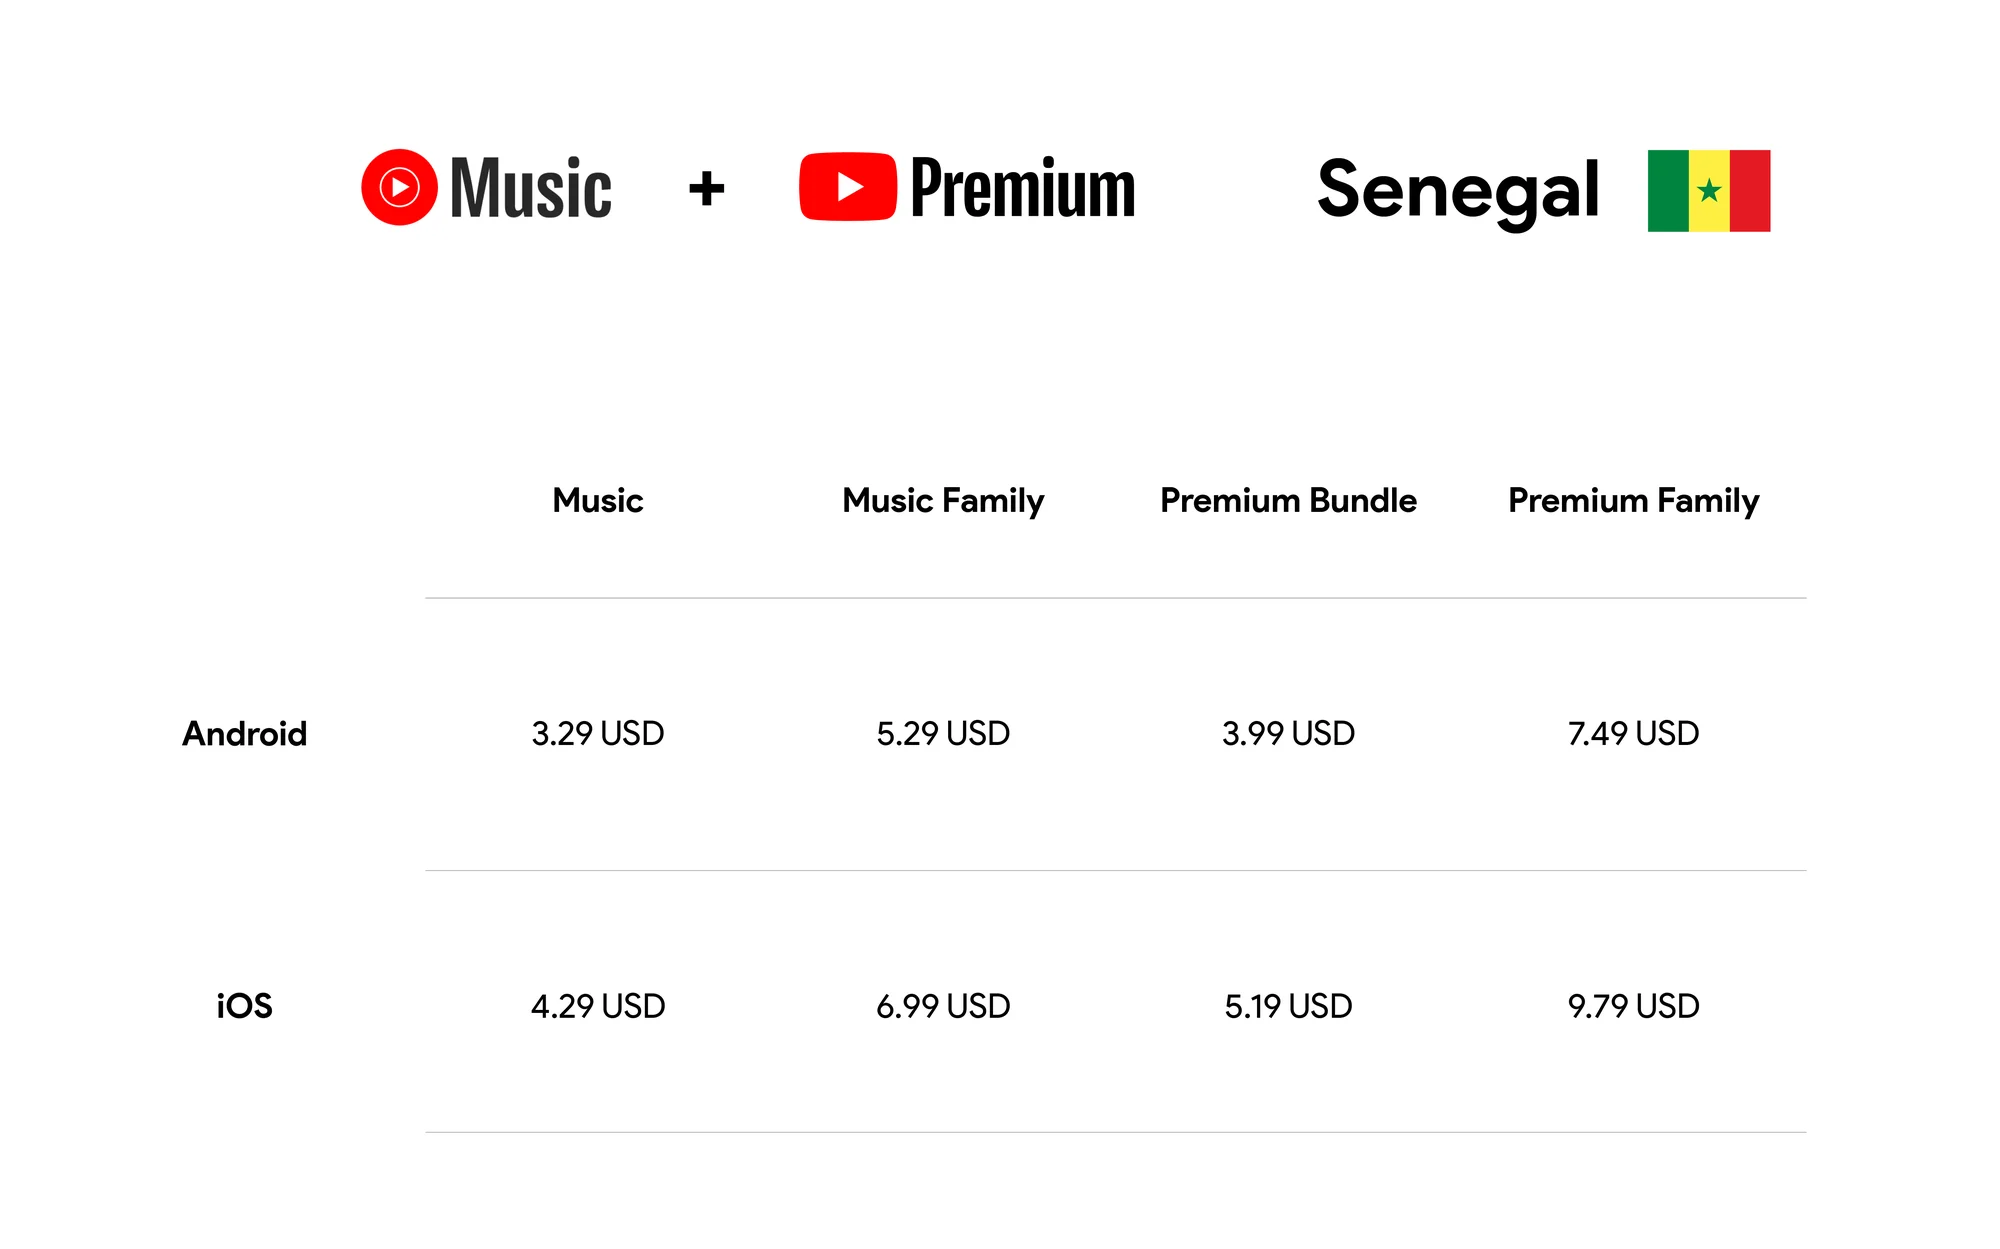 The image is a pricing chart for YouTube Music and YouTube Premium services in Senegal. The chart is categorized for Android and iOS users, with prices listed in US Dollars. For Android, the prices are: Music at 3.29 USD, Music Family at 5.29 USD, Premium Bundle at 3.99 USD, and Premium Family at 7.49 USD. For iOS, the prices are: Music at 4.29 USD, Music Family at 6.99 USD, Premium Bundle at 5.19 USD, and Premium Family at 9.79 USD. The top of the chart has the YouTube Music and YouTube Premium logos, with the flag of Senegal on the right side.